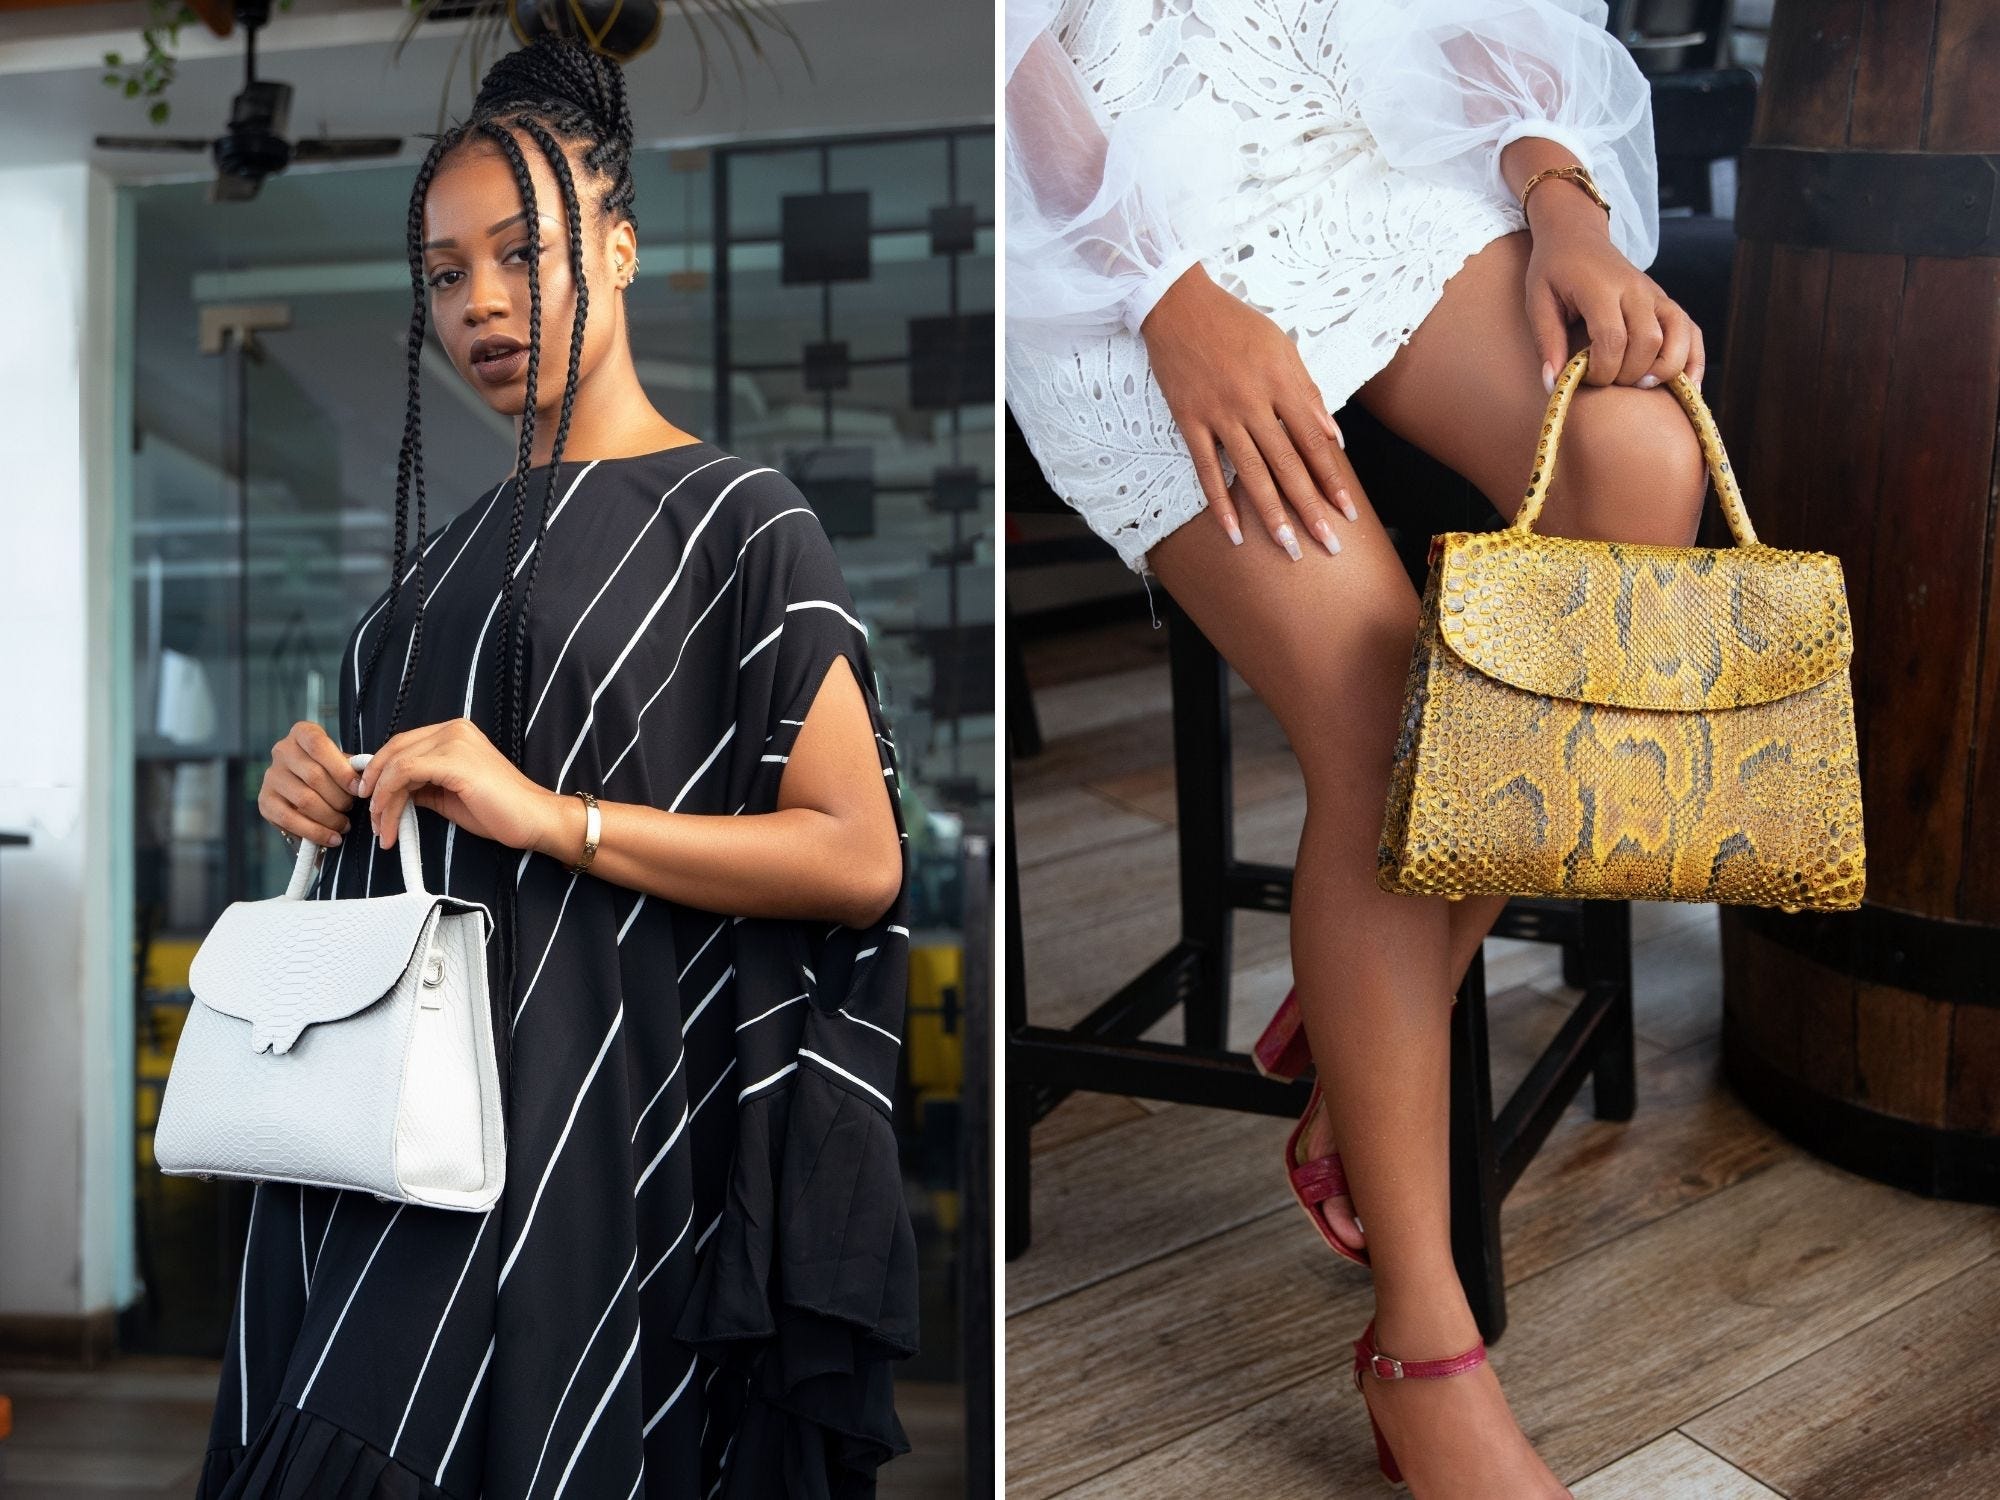 Two models hold leather handbags by Winston Leather -- one holds a white handbag with a top handle and the other holds an animal-printed yellow handbag with a top handle.